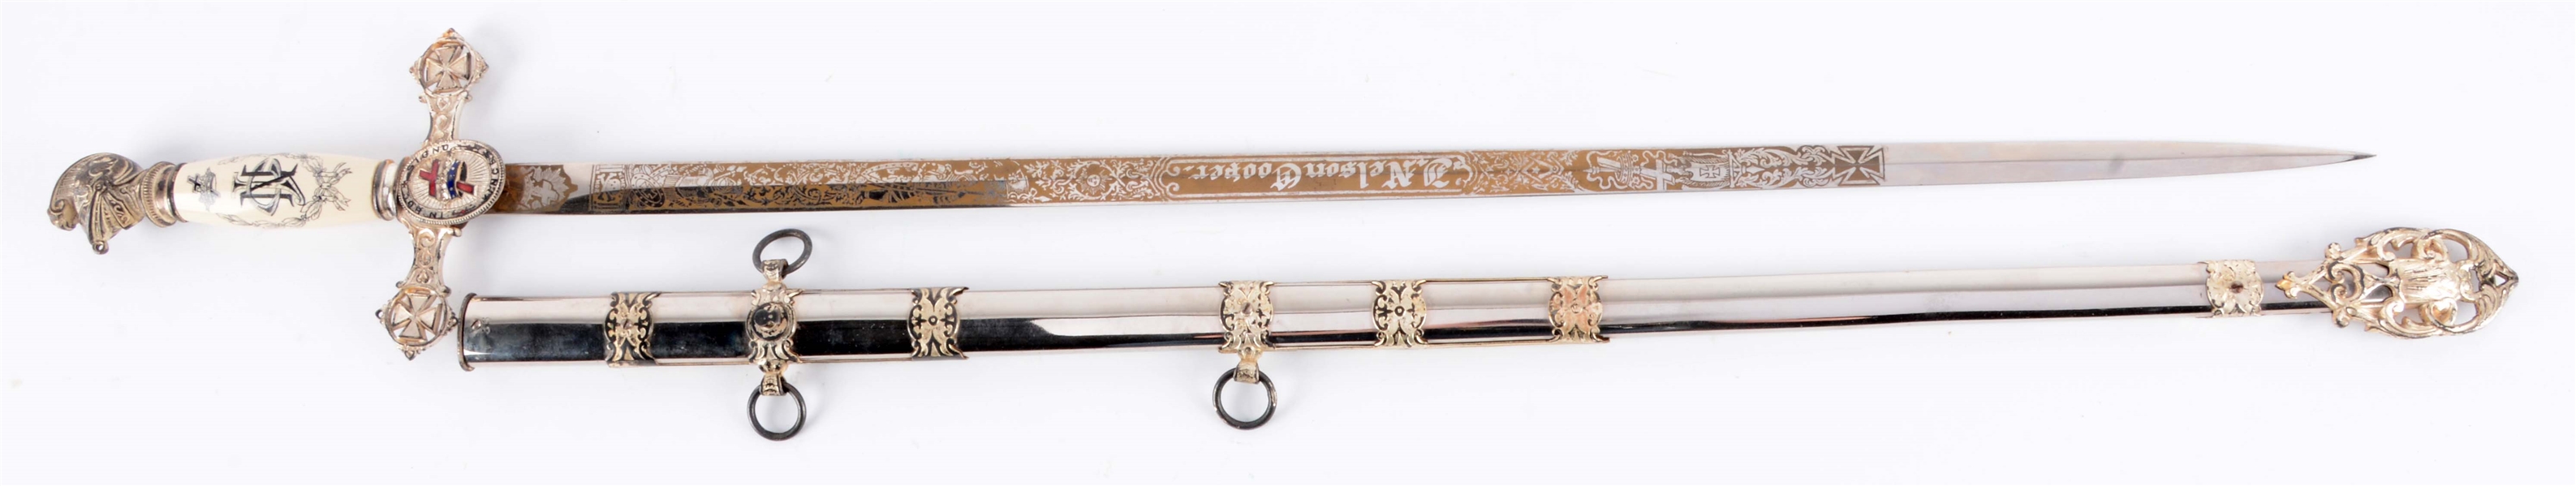 LILLEY-AMES CO. ELABORATE FRATERNAL DRESS SWORD.